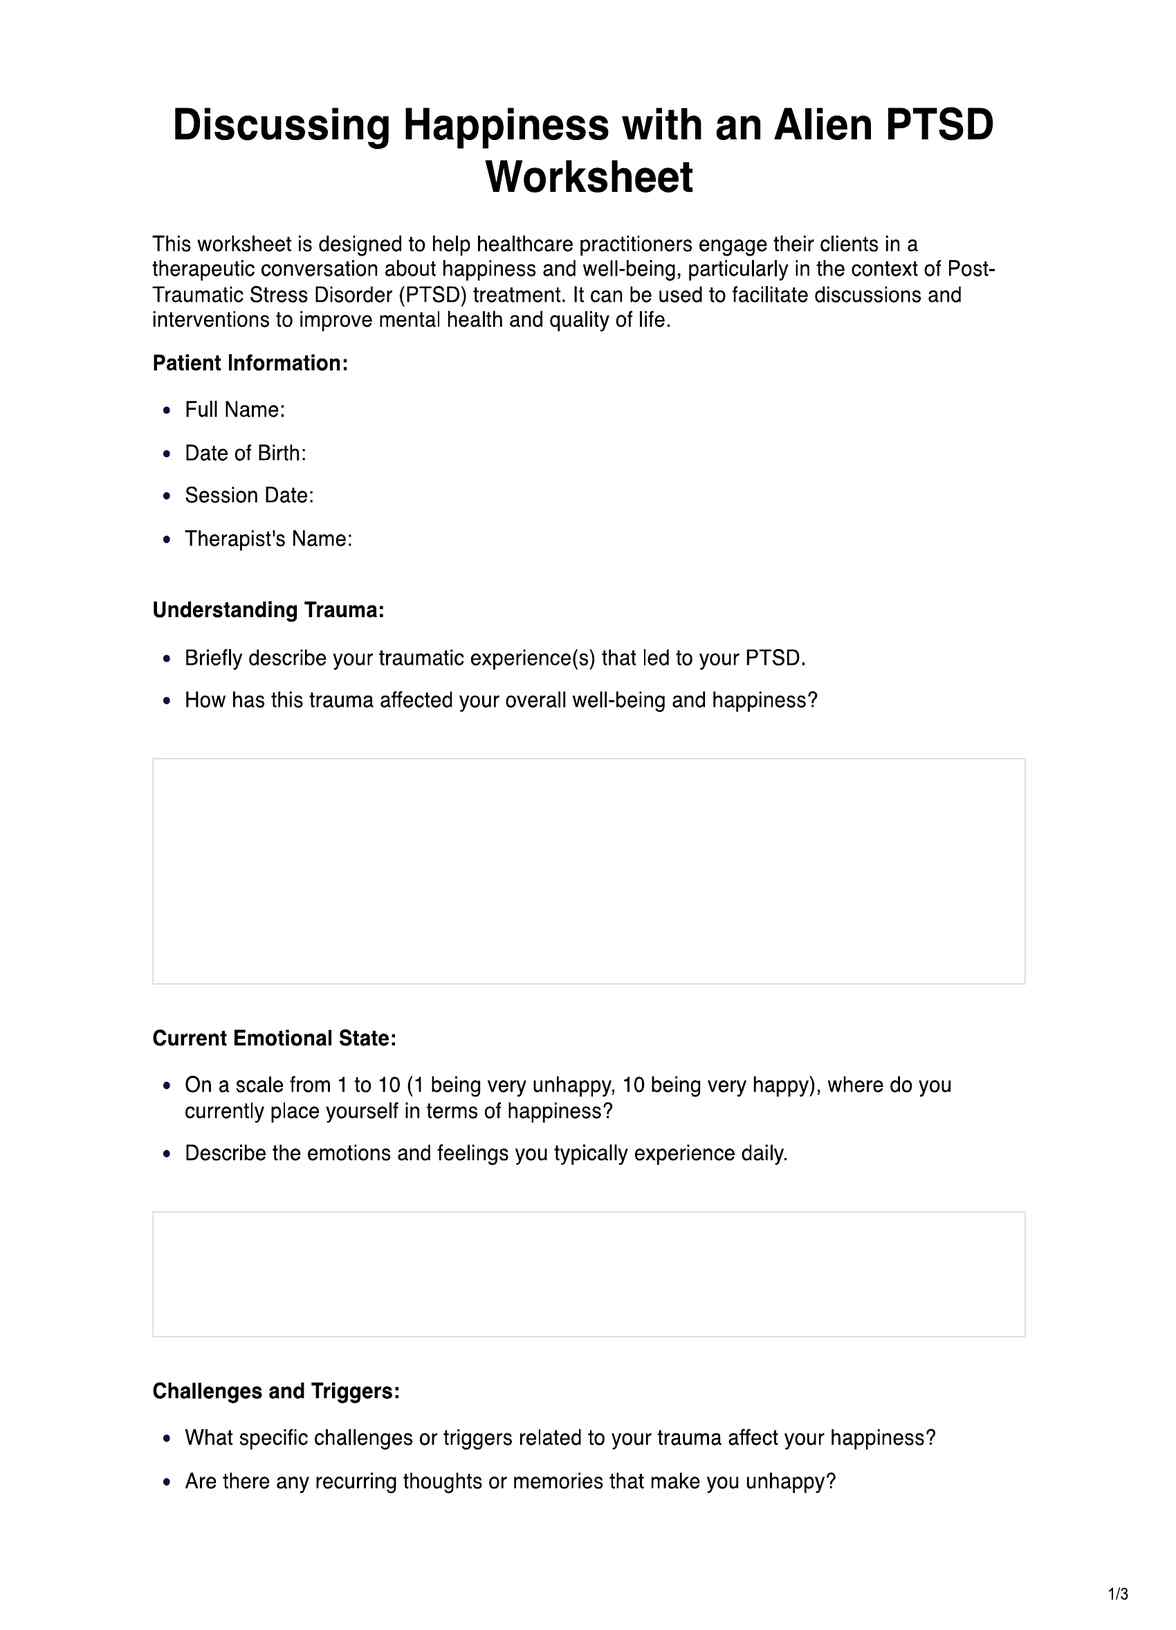 Discussing Happiness with an Alien PTSD Worksheet PDF Example